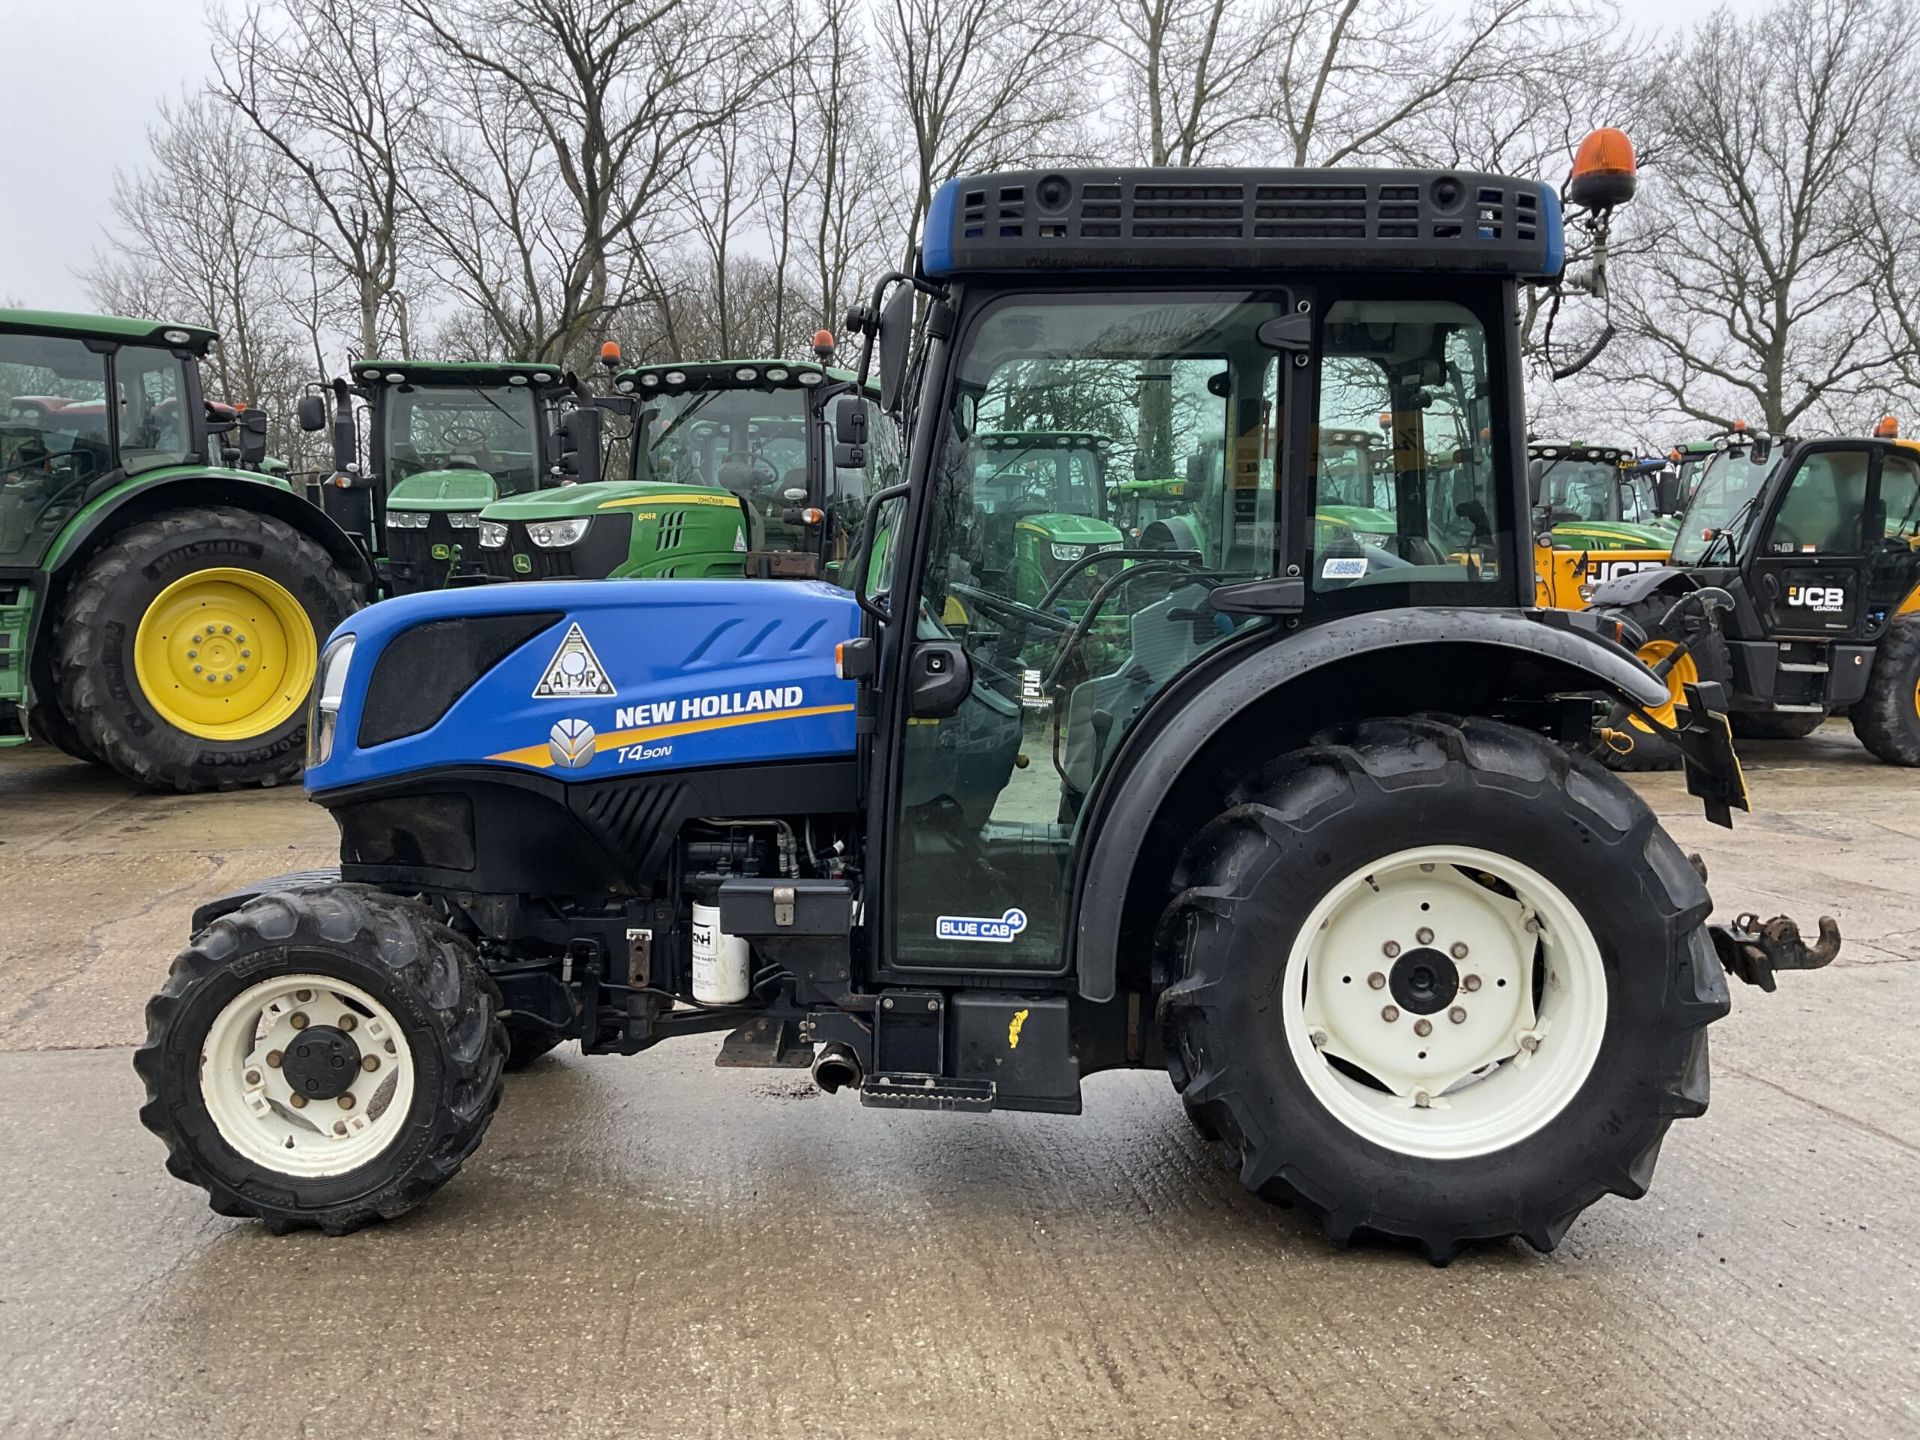 YEAR 2018 NEW HOLLAND T4.90N. FRONT WEIGHTS. 4 SPOOLS